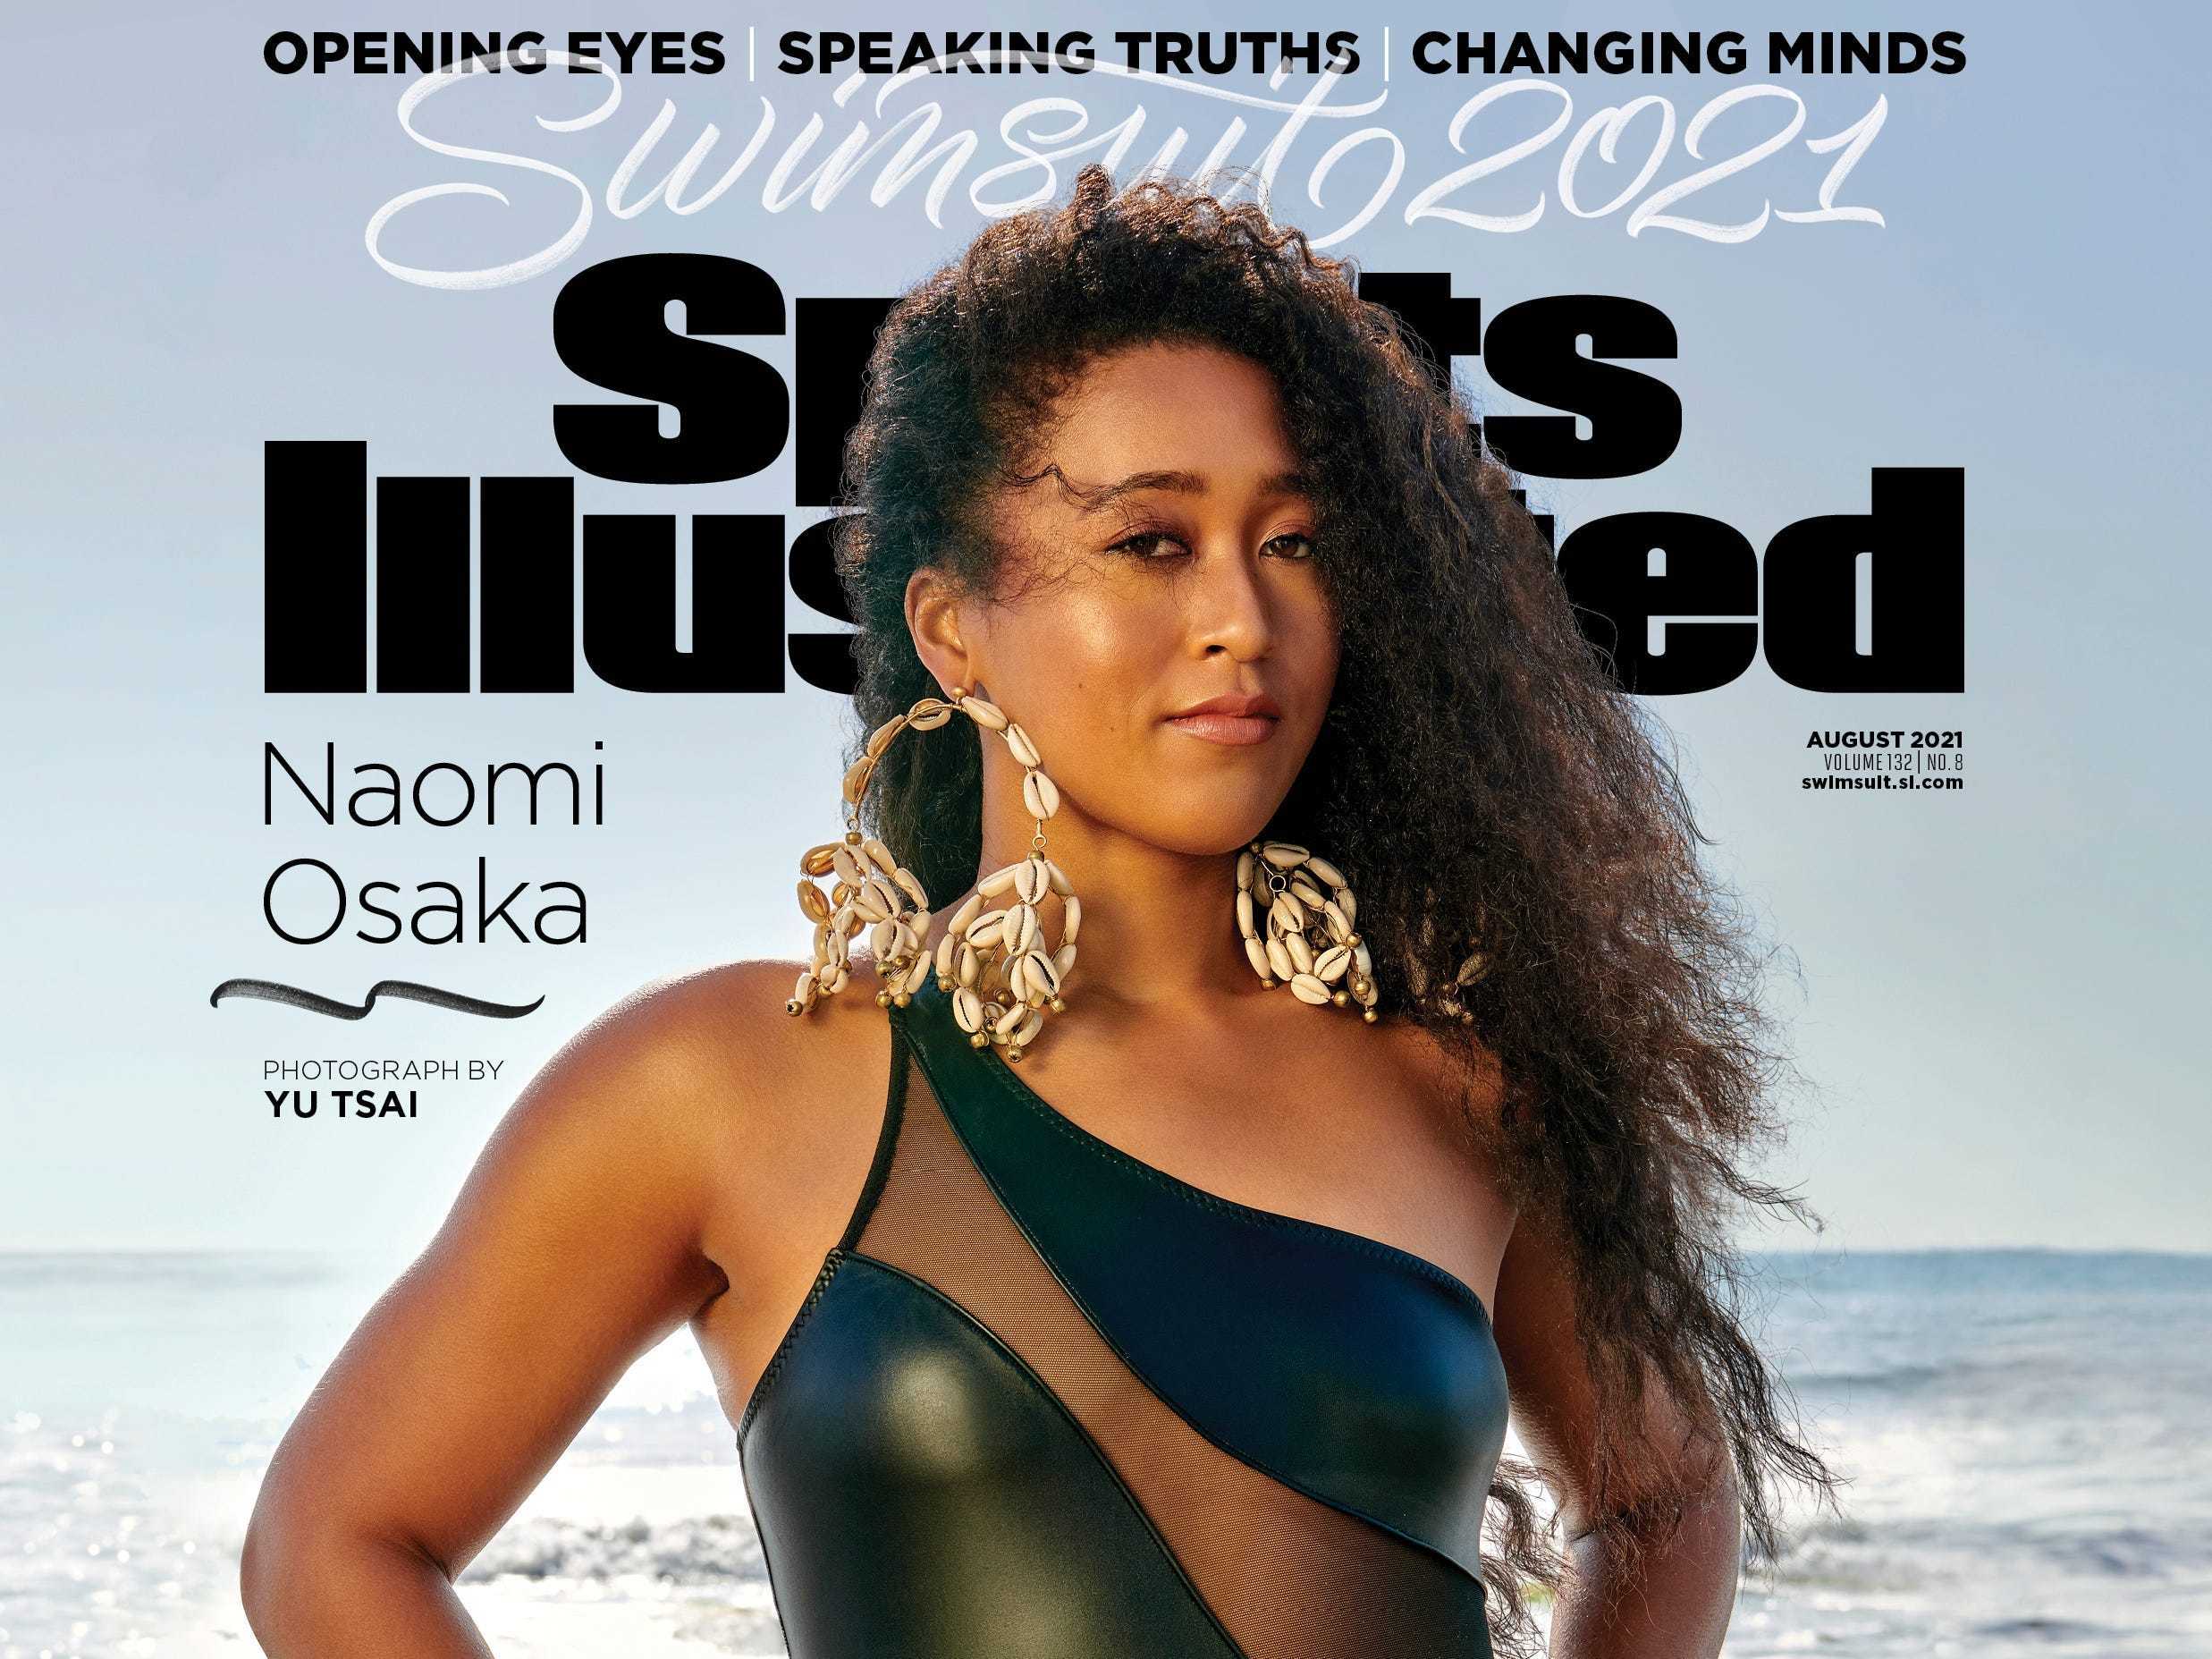 Naomi Osaka stands in front of an ocean in a black, sheer swimsuit on the cover of "Sports Illustrated."